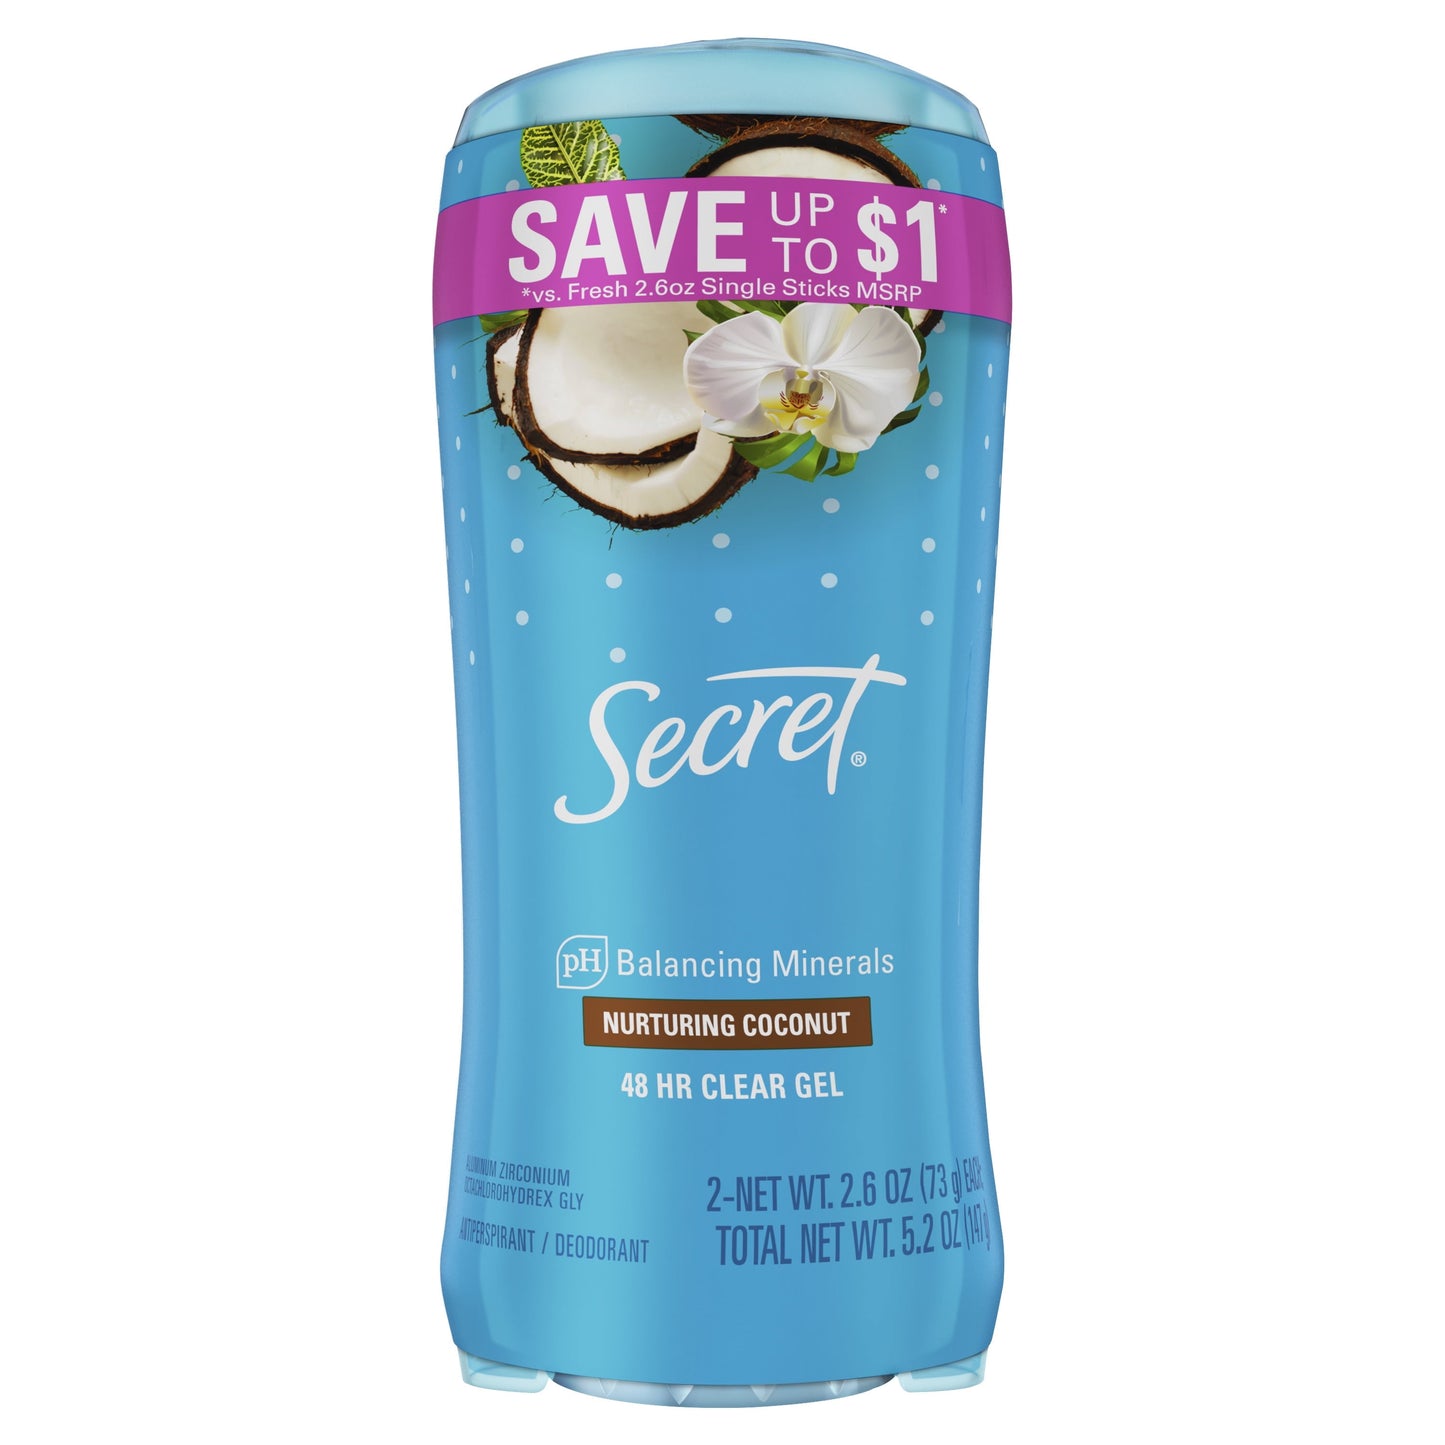 Secret Fresh Clear Gel Antiperspirant and Deodorant for Women, Coconut Scent, 2.6 oz each, Pack of 2